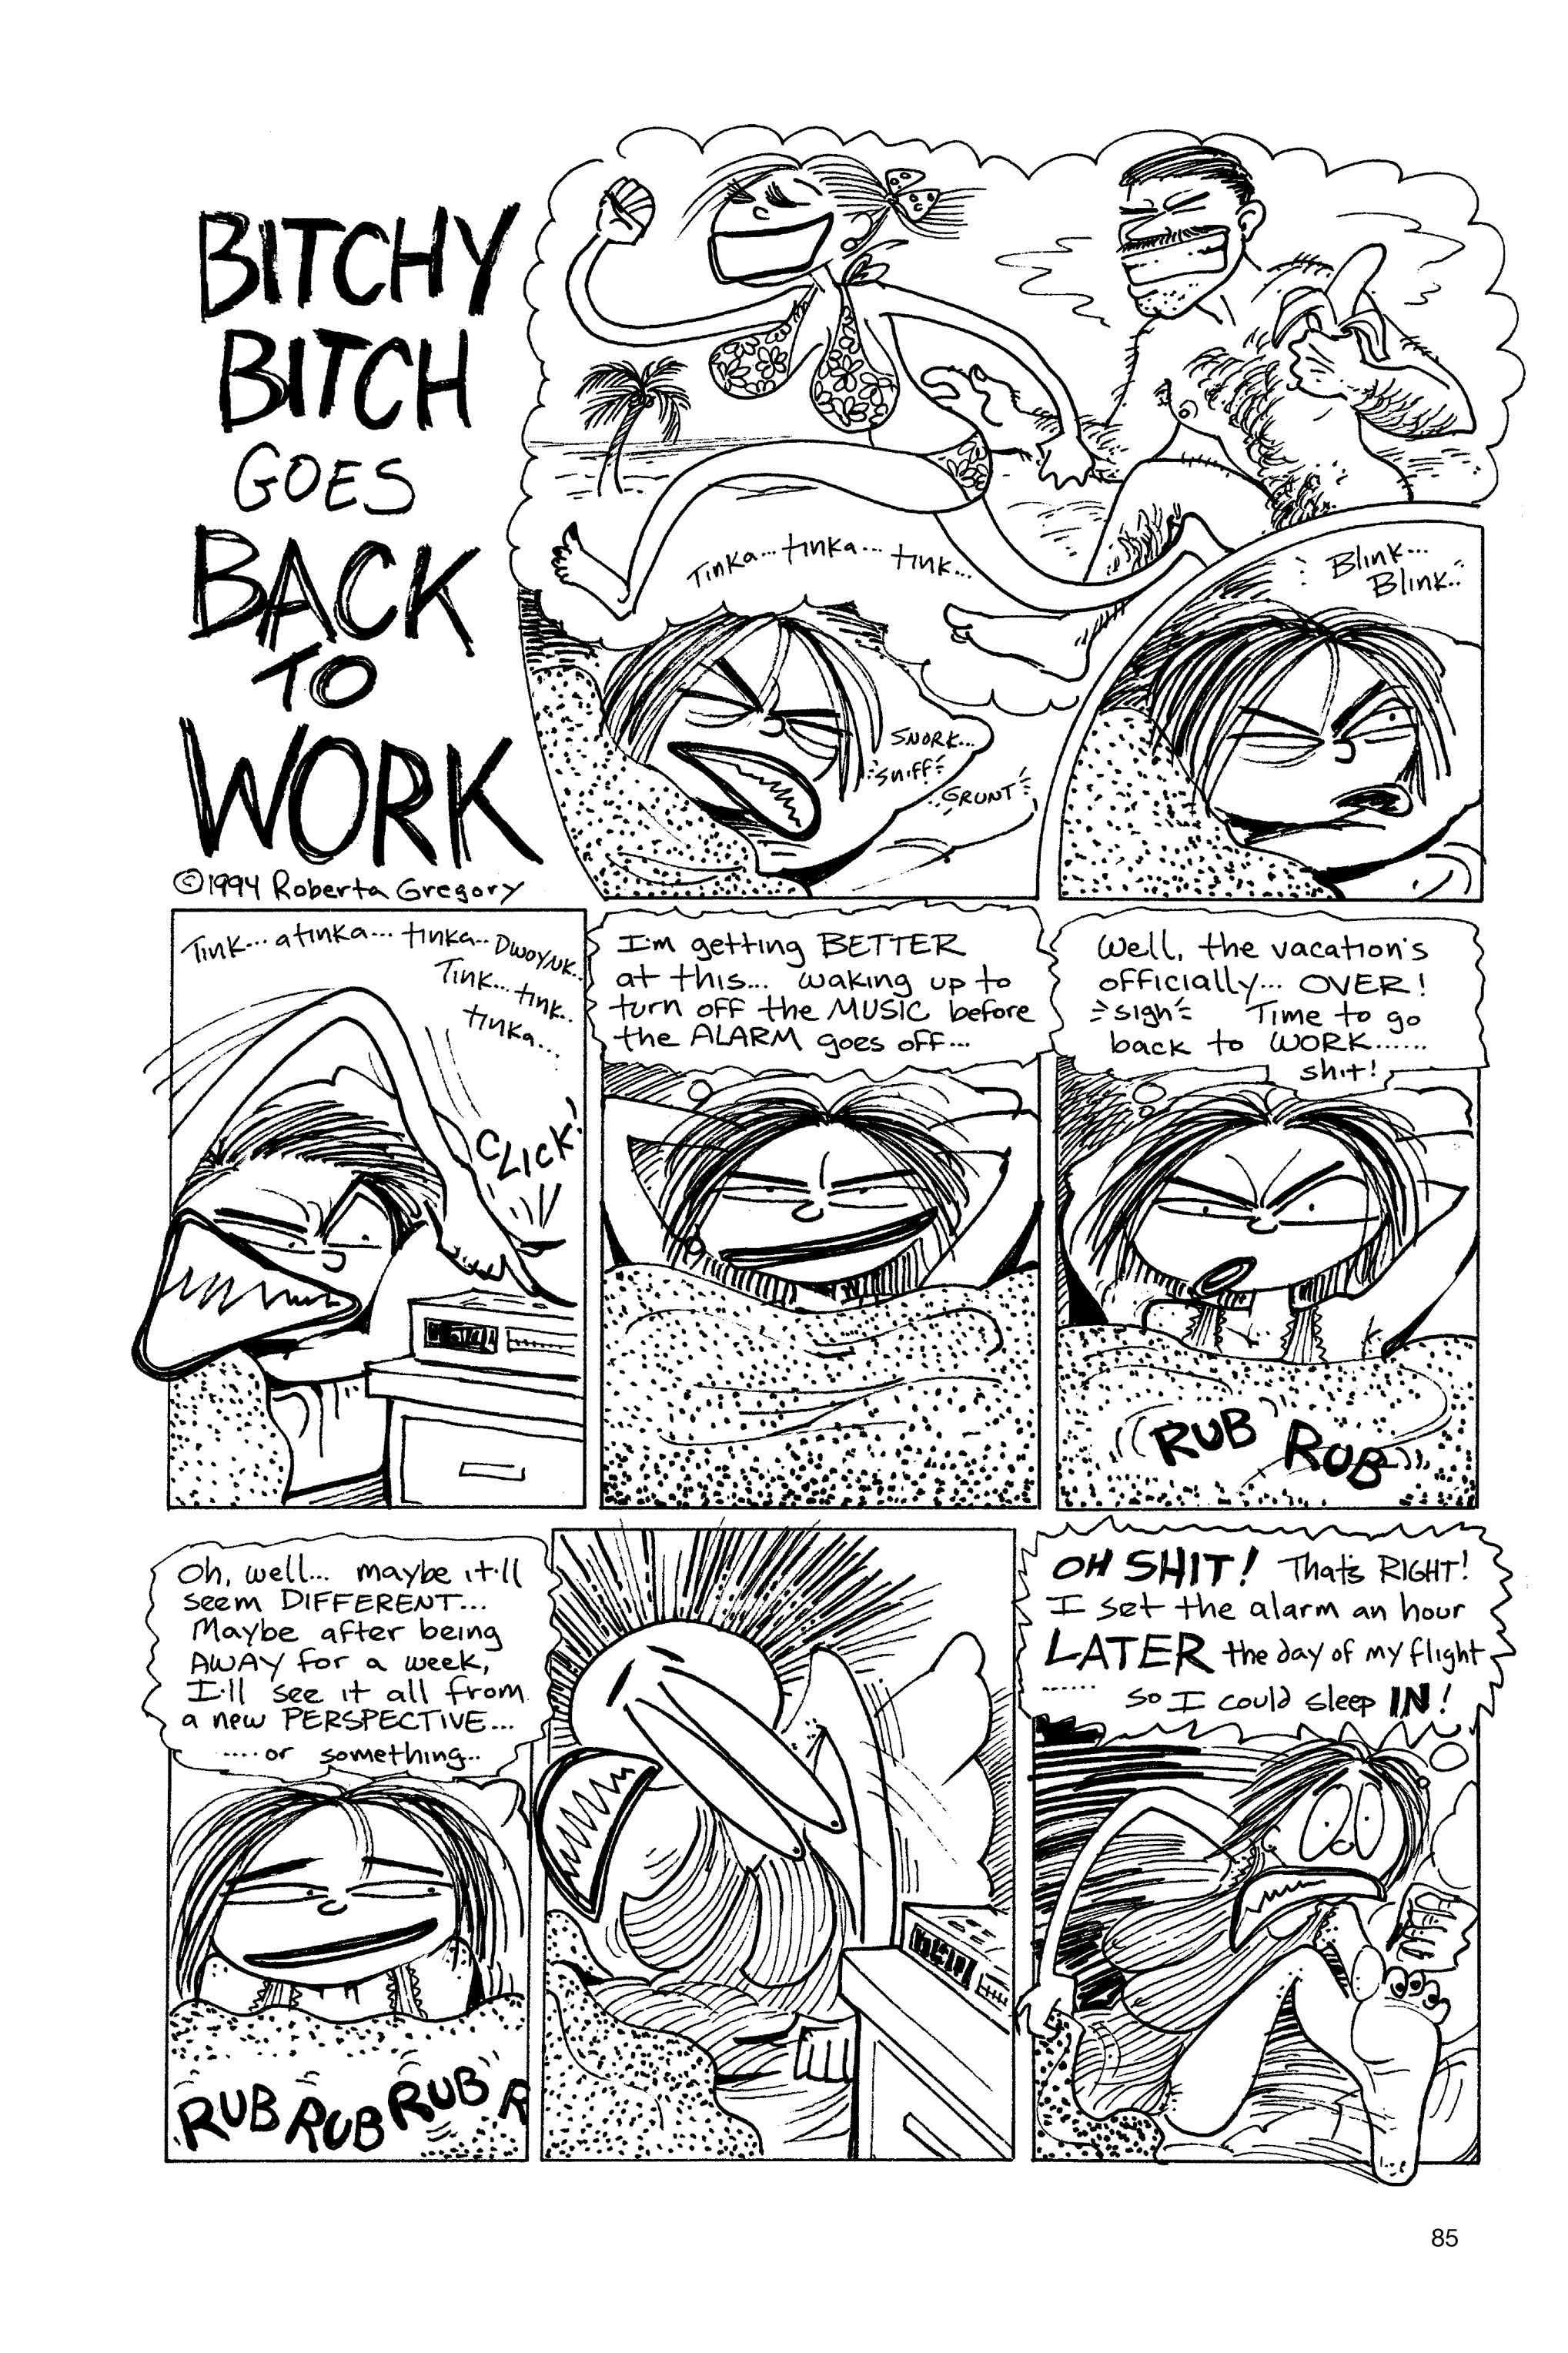 Read online Life's a Bitch: The Complete Bitchy Bitch Stories comic -  Issue # TPB (Part 1) - 83